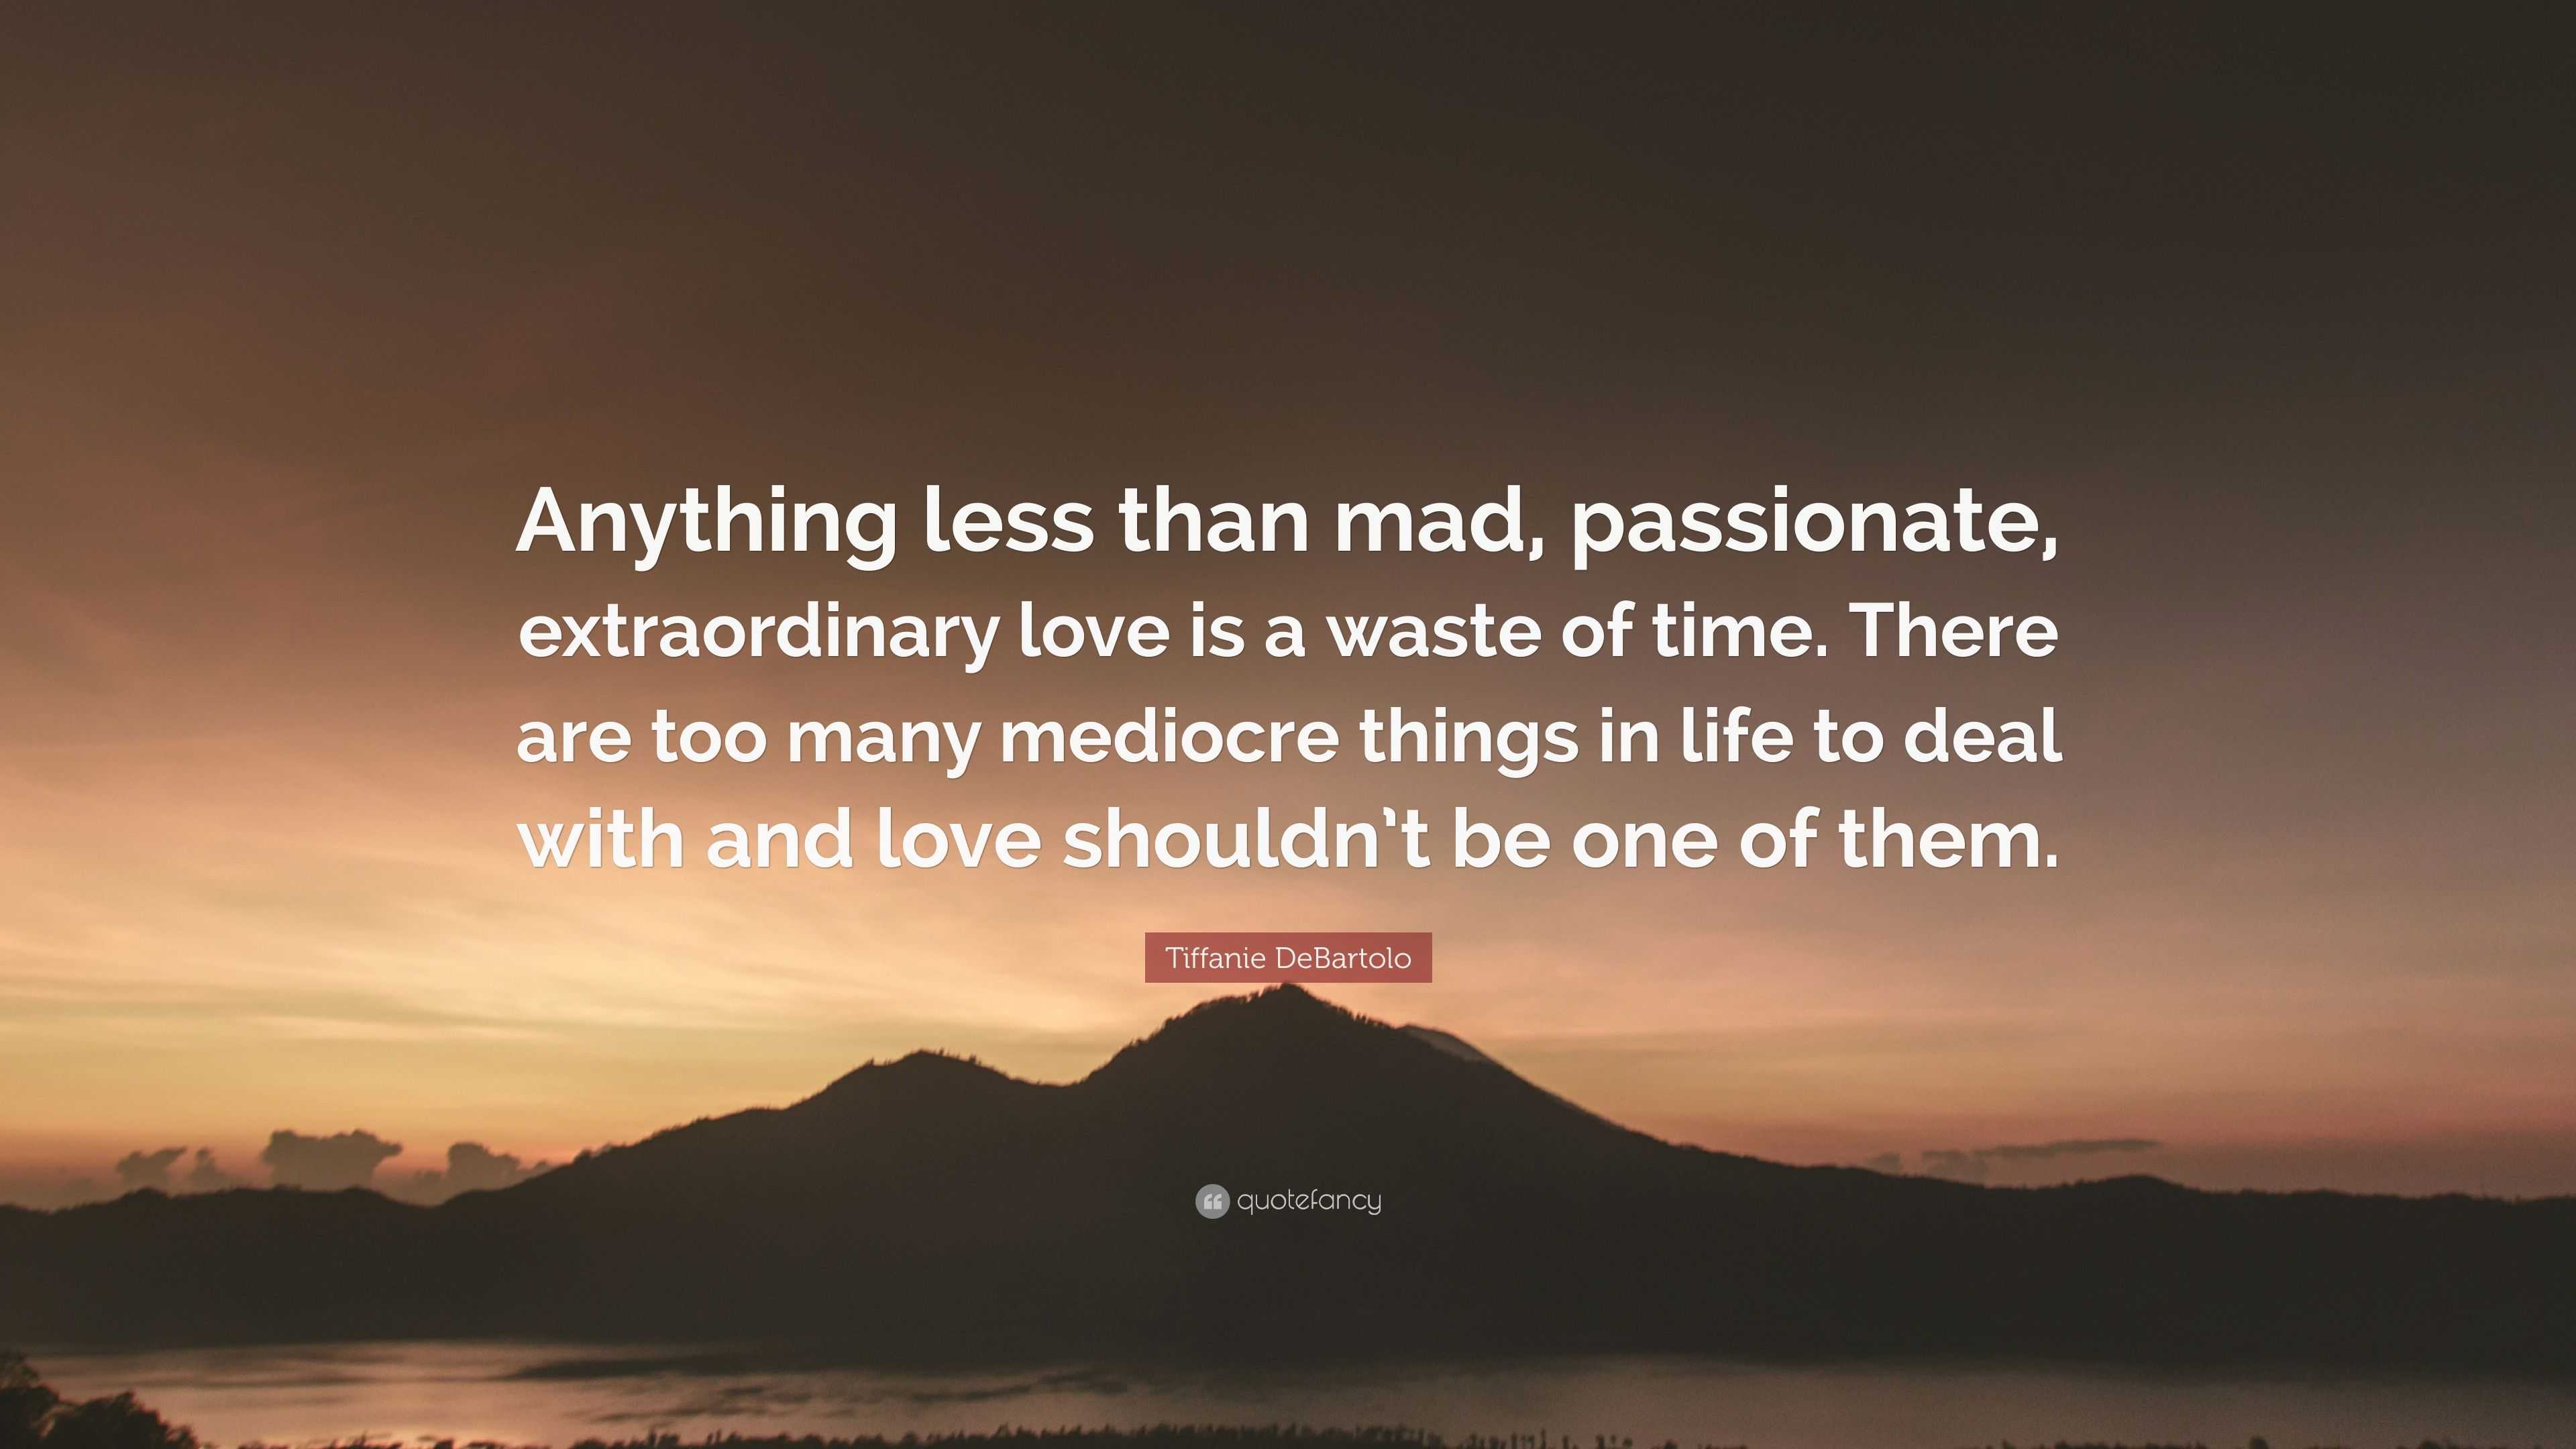 Tiffanie DeBartolo Quote “Anything less than mad passionate extraordinary love is a